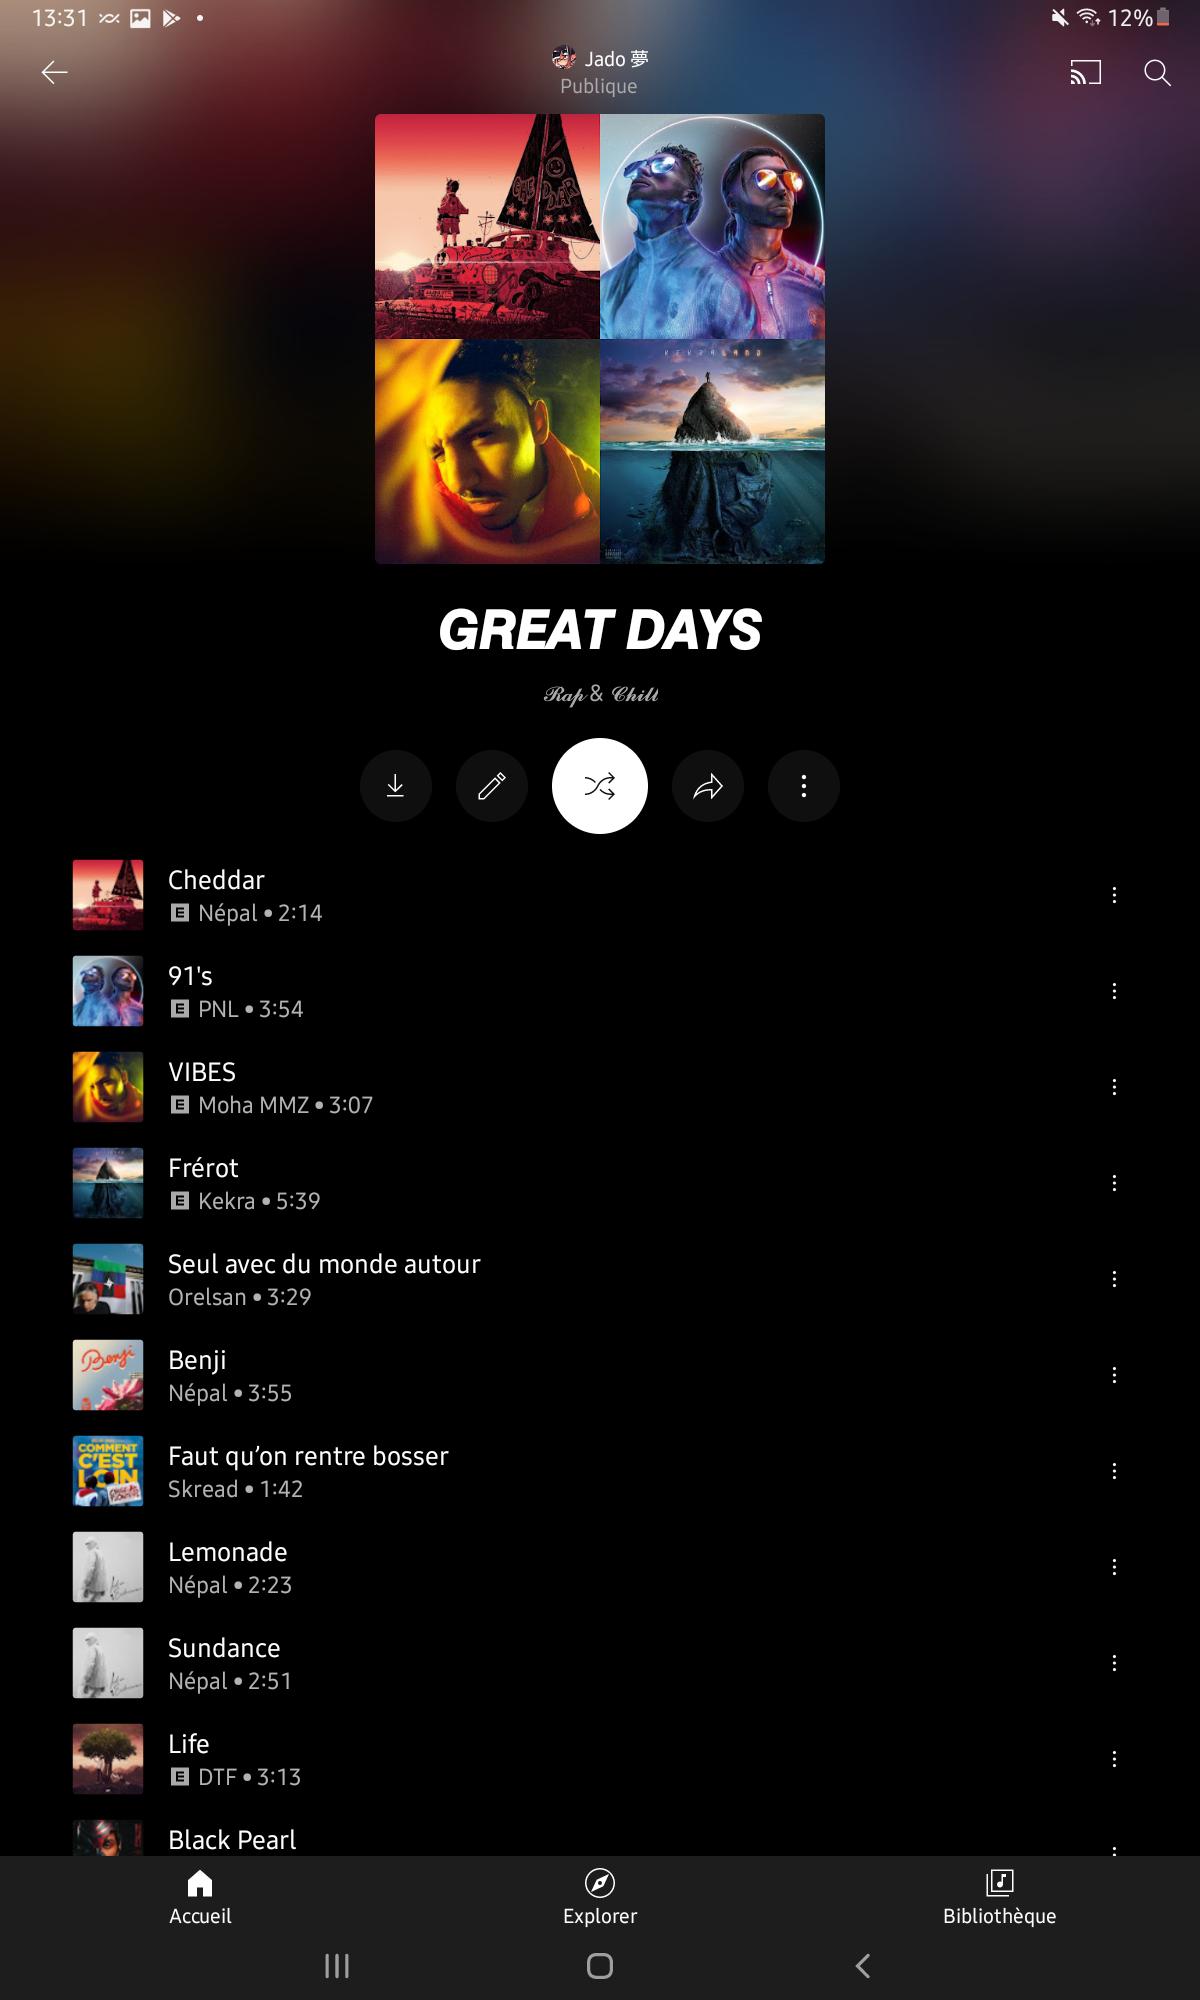 youtube music download songs